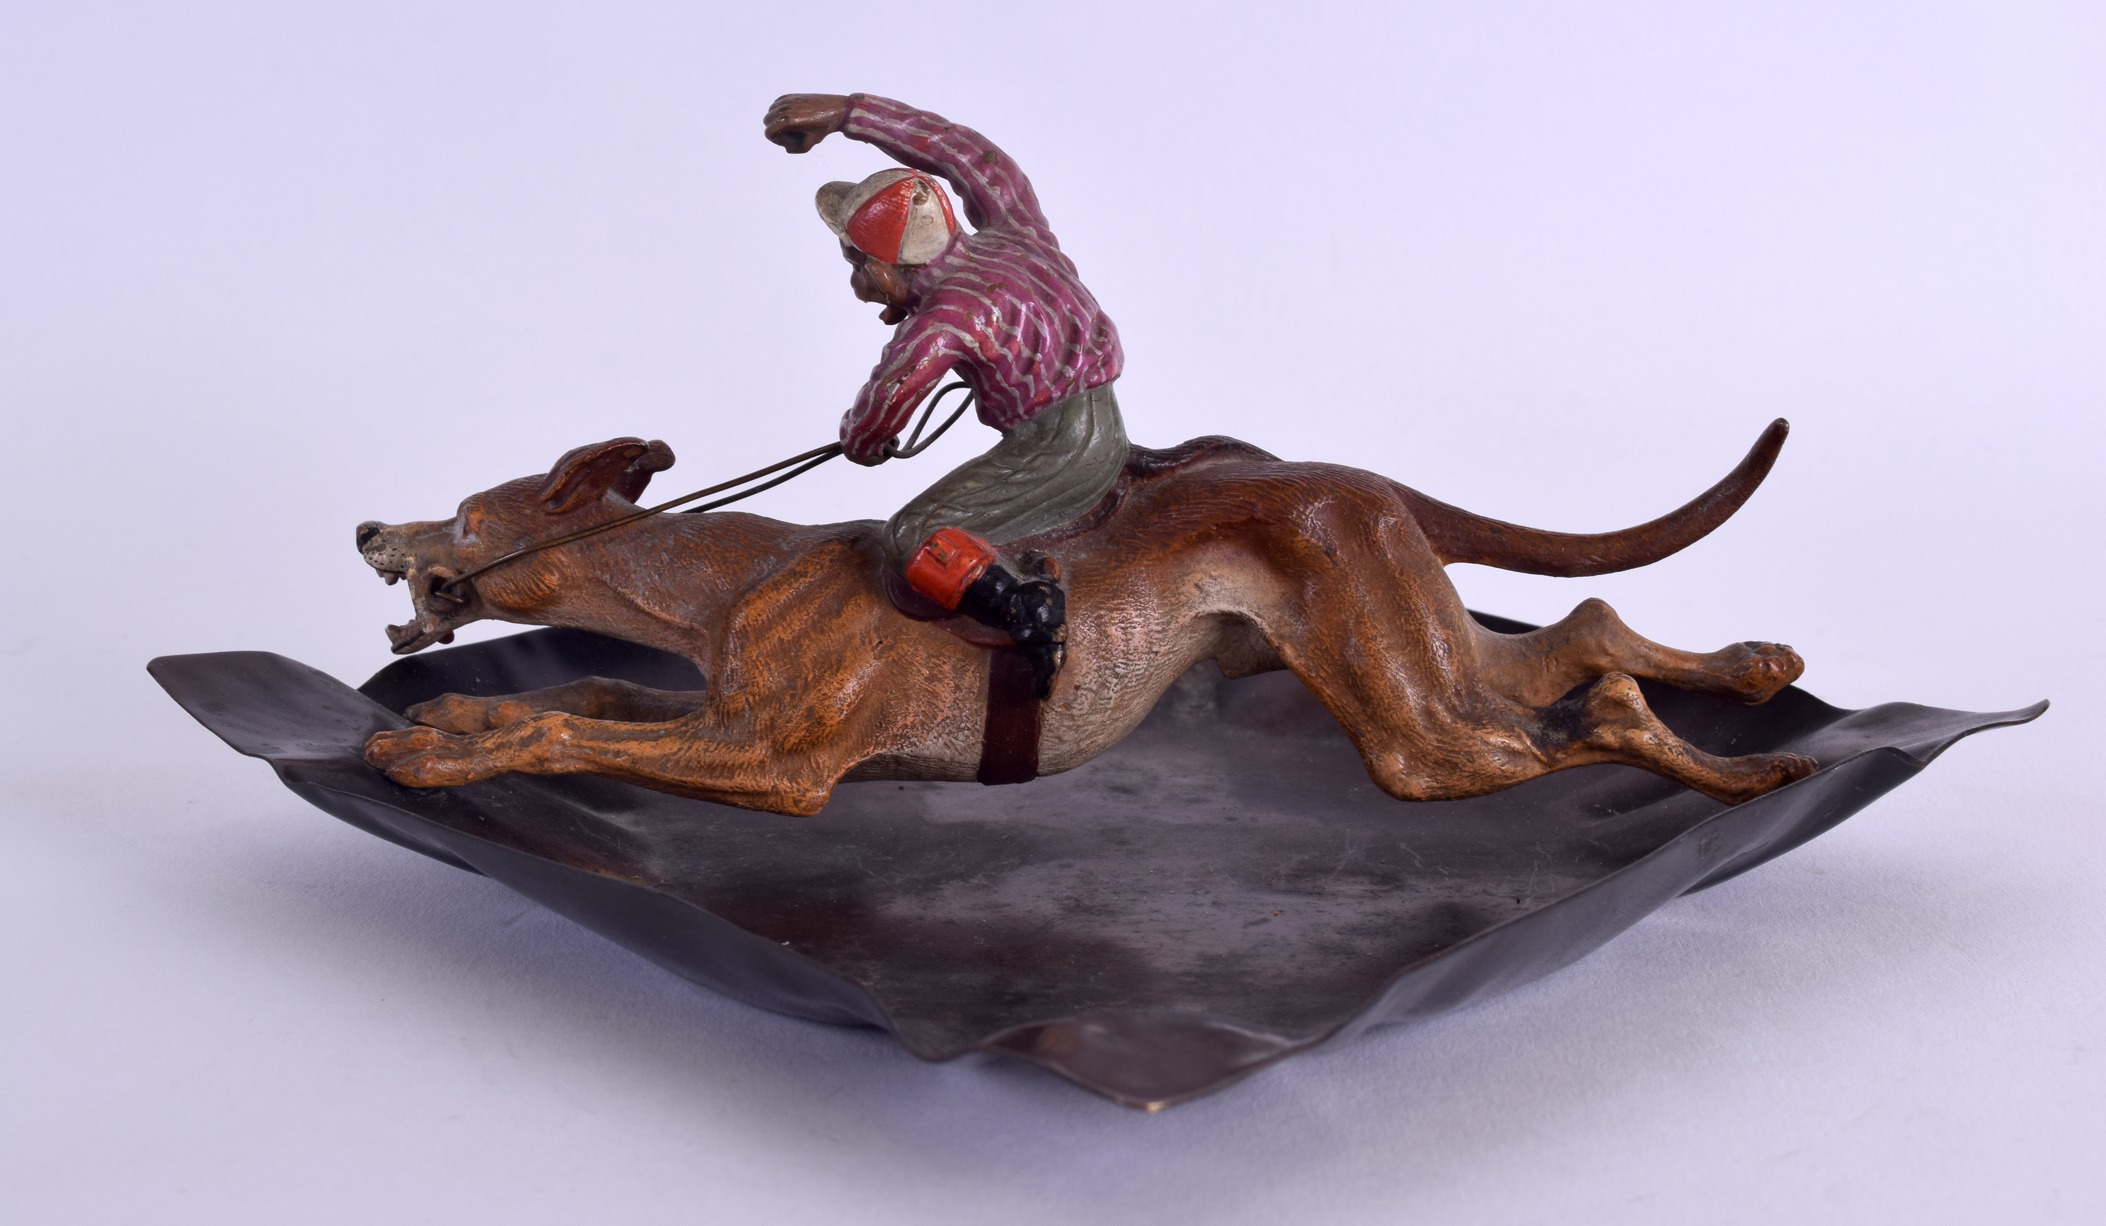 A RARE 19TH CENTURY AUSTRIAN COLD PAINTED BRONZE FIGURE OF A MONKEY in the form of a jockey riding - Image 2 of 4